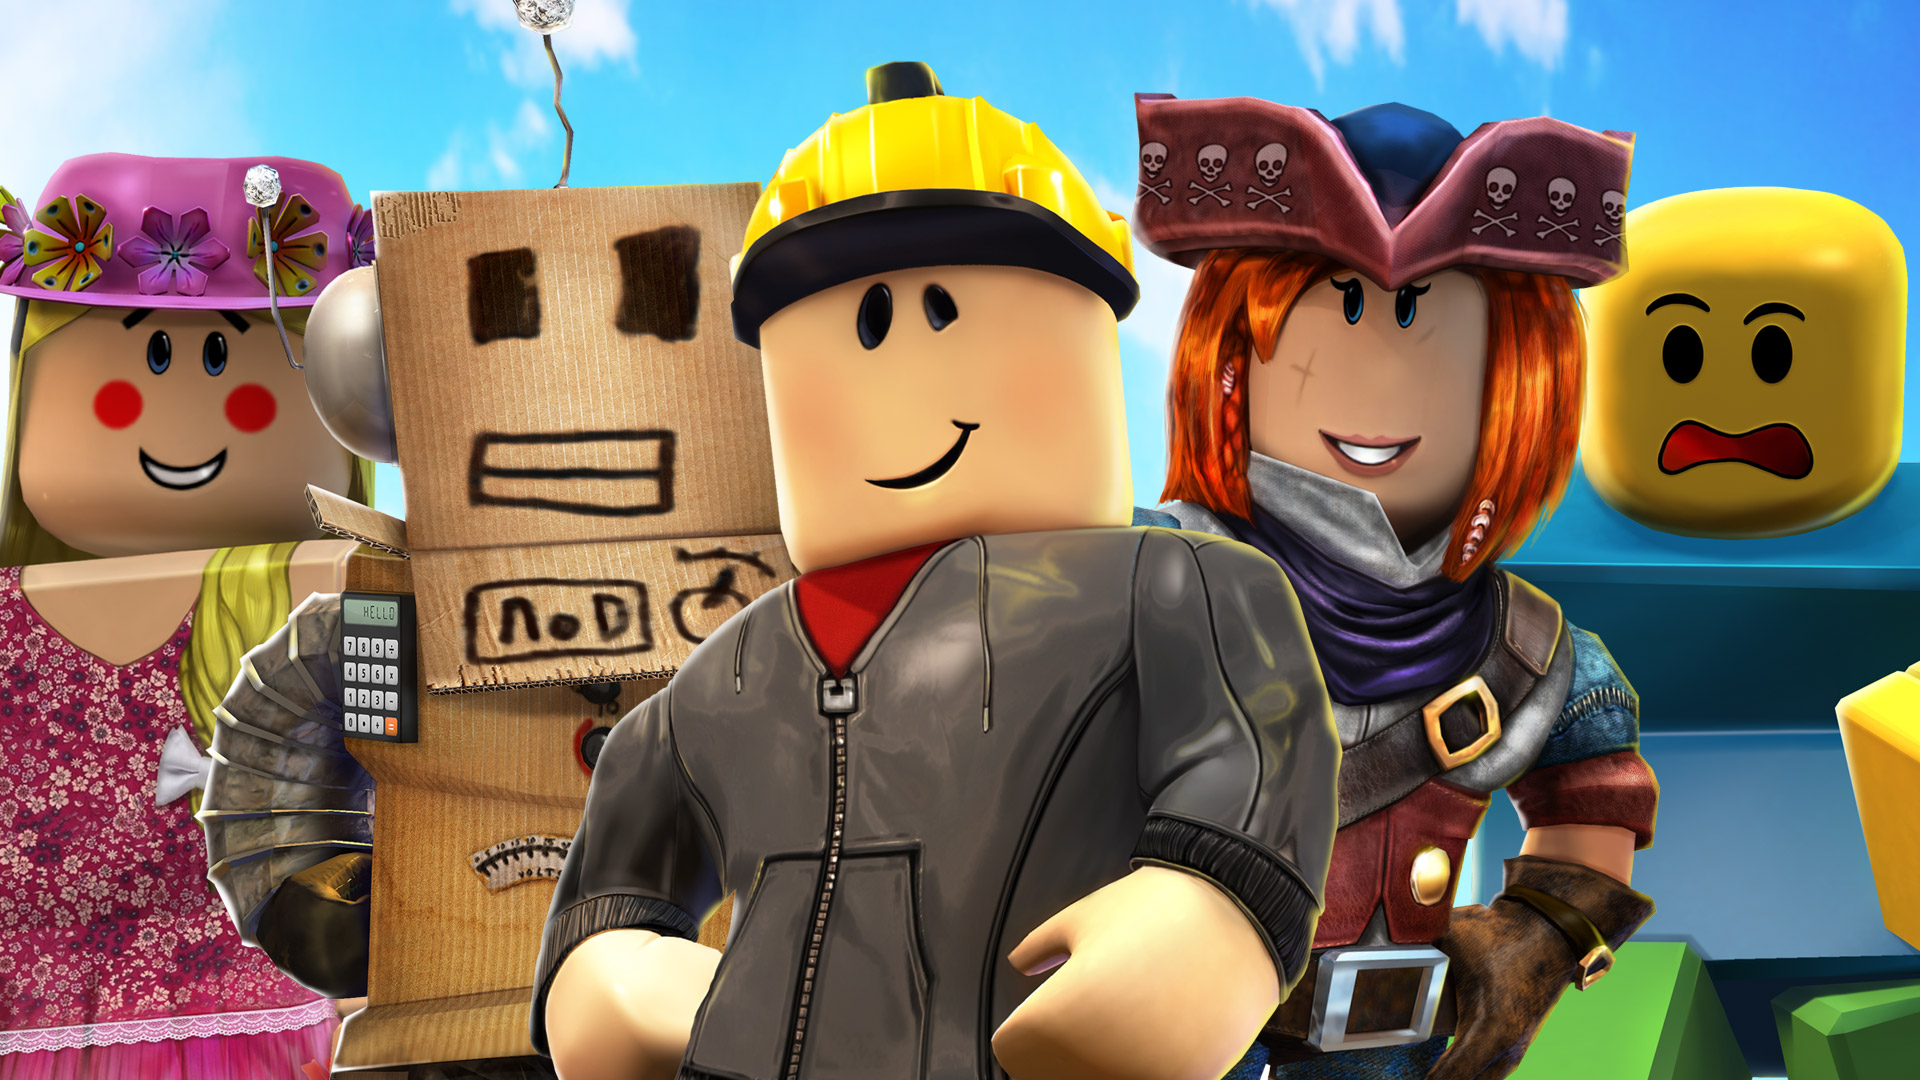 Download Roblox-Inspired Wallpapers